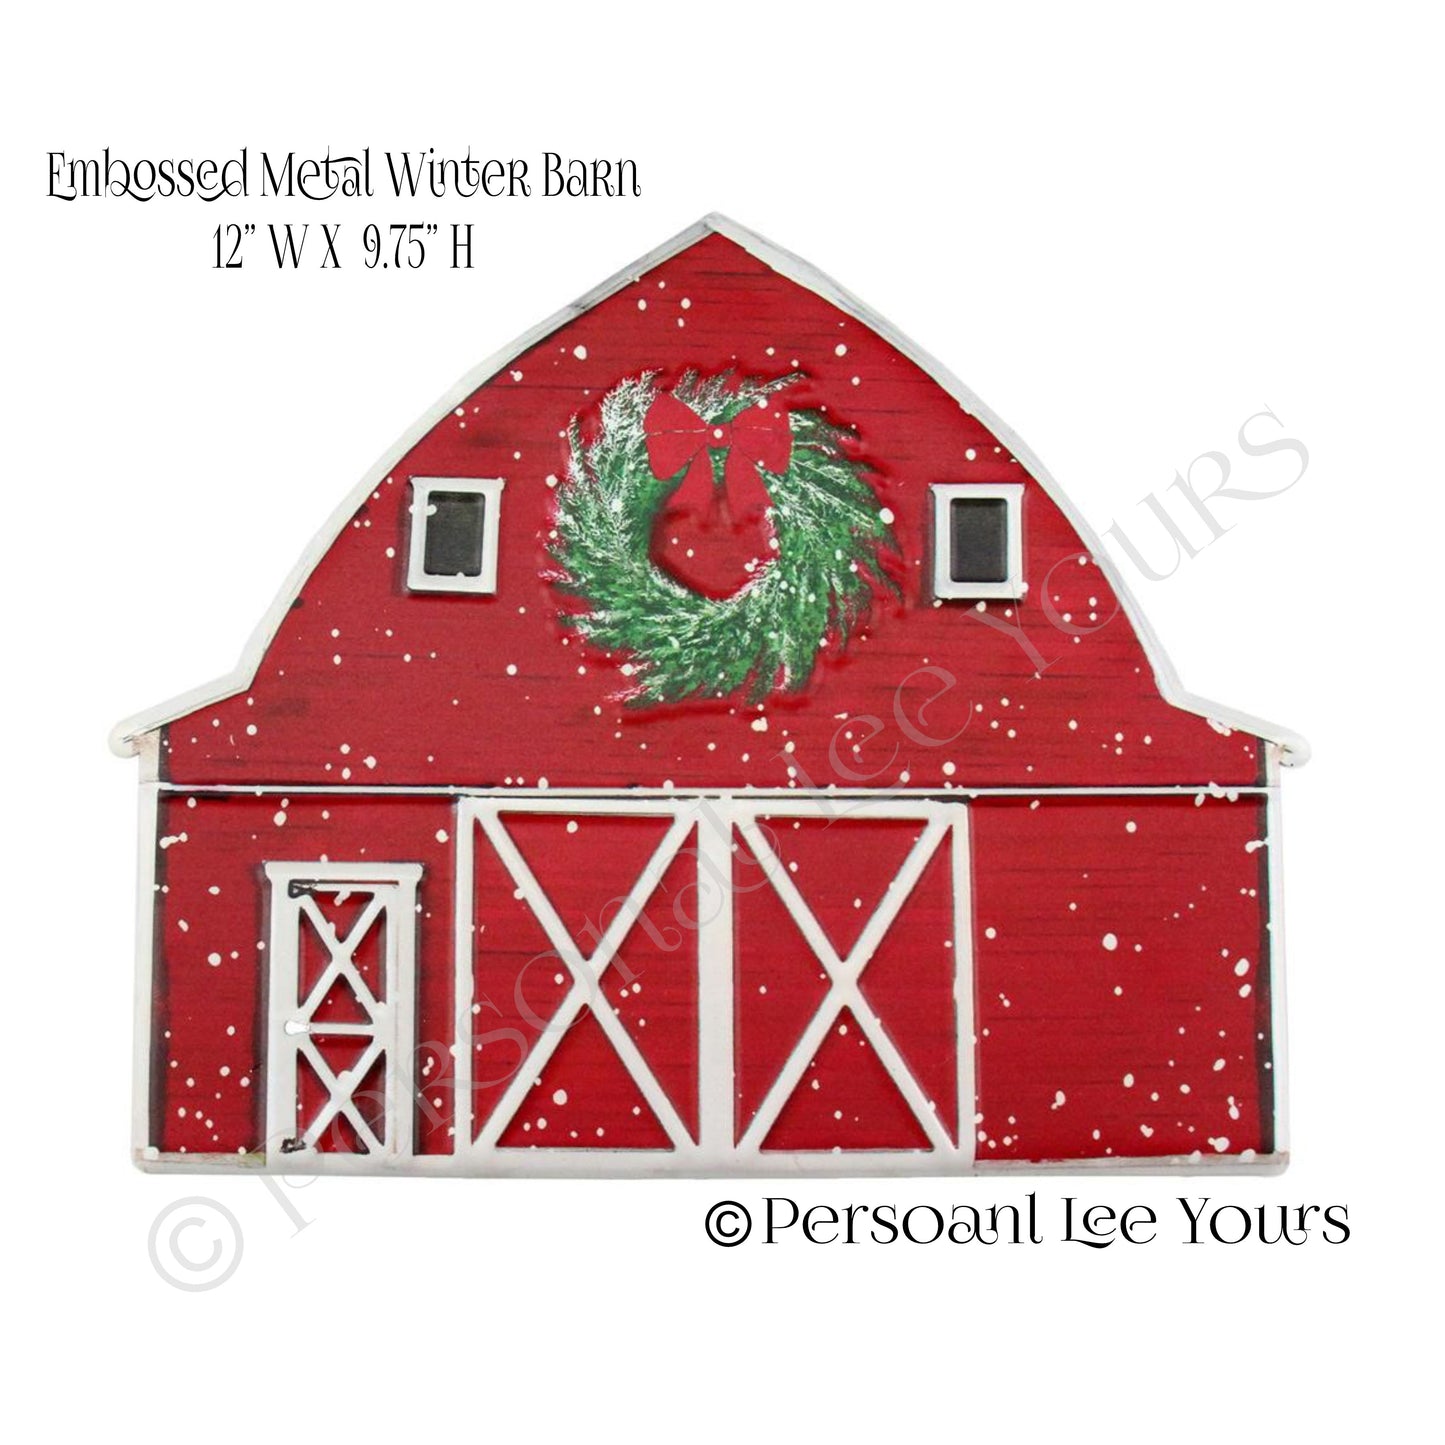 Wreath Accent * Red Winter Barn * Embossed Metal * 12" W  x 9.75" W * Lightweight